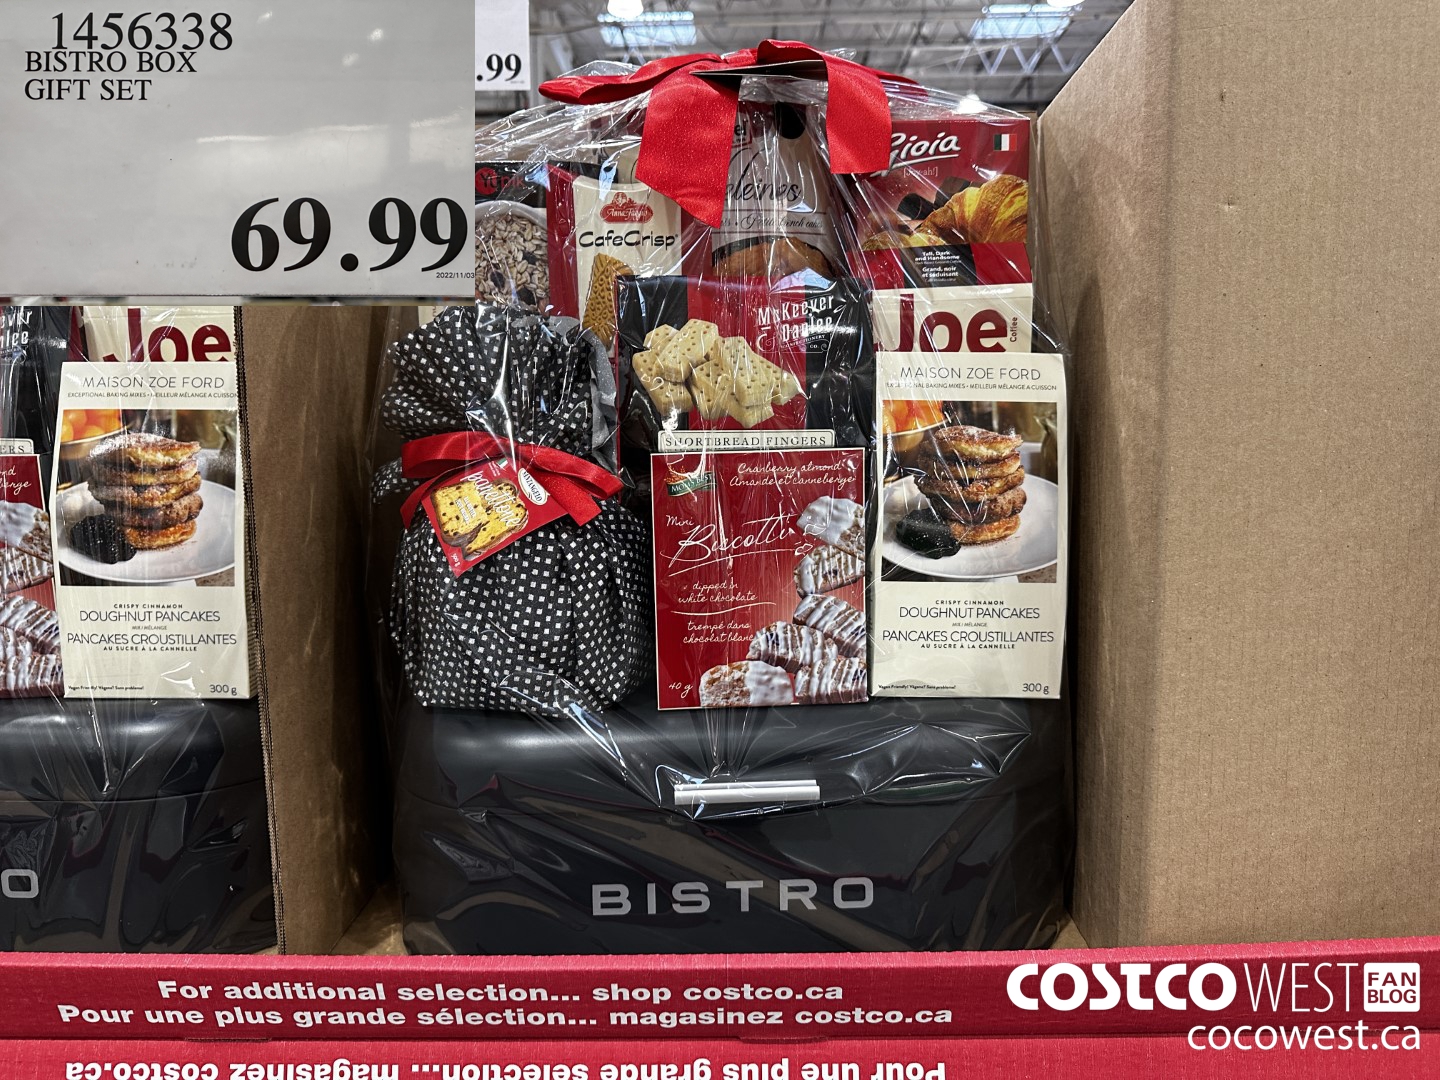 Weekend Update! – Costco Sale Items for Nov 4-6, 2022 for BC, AB, MB, SK -  Costco West Fan Blog